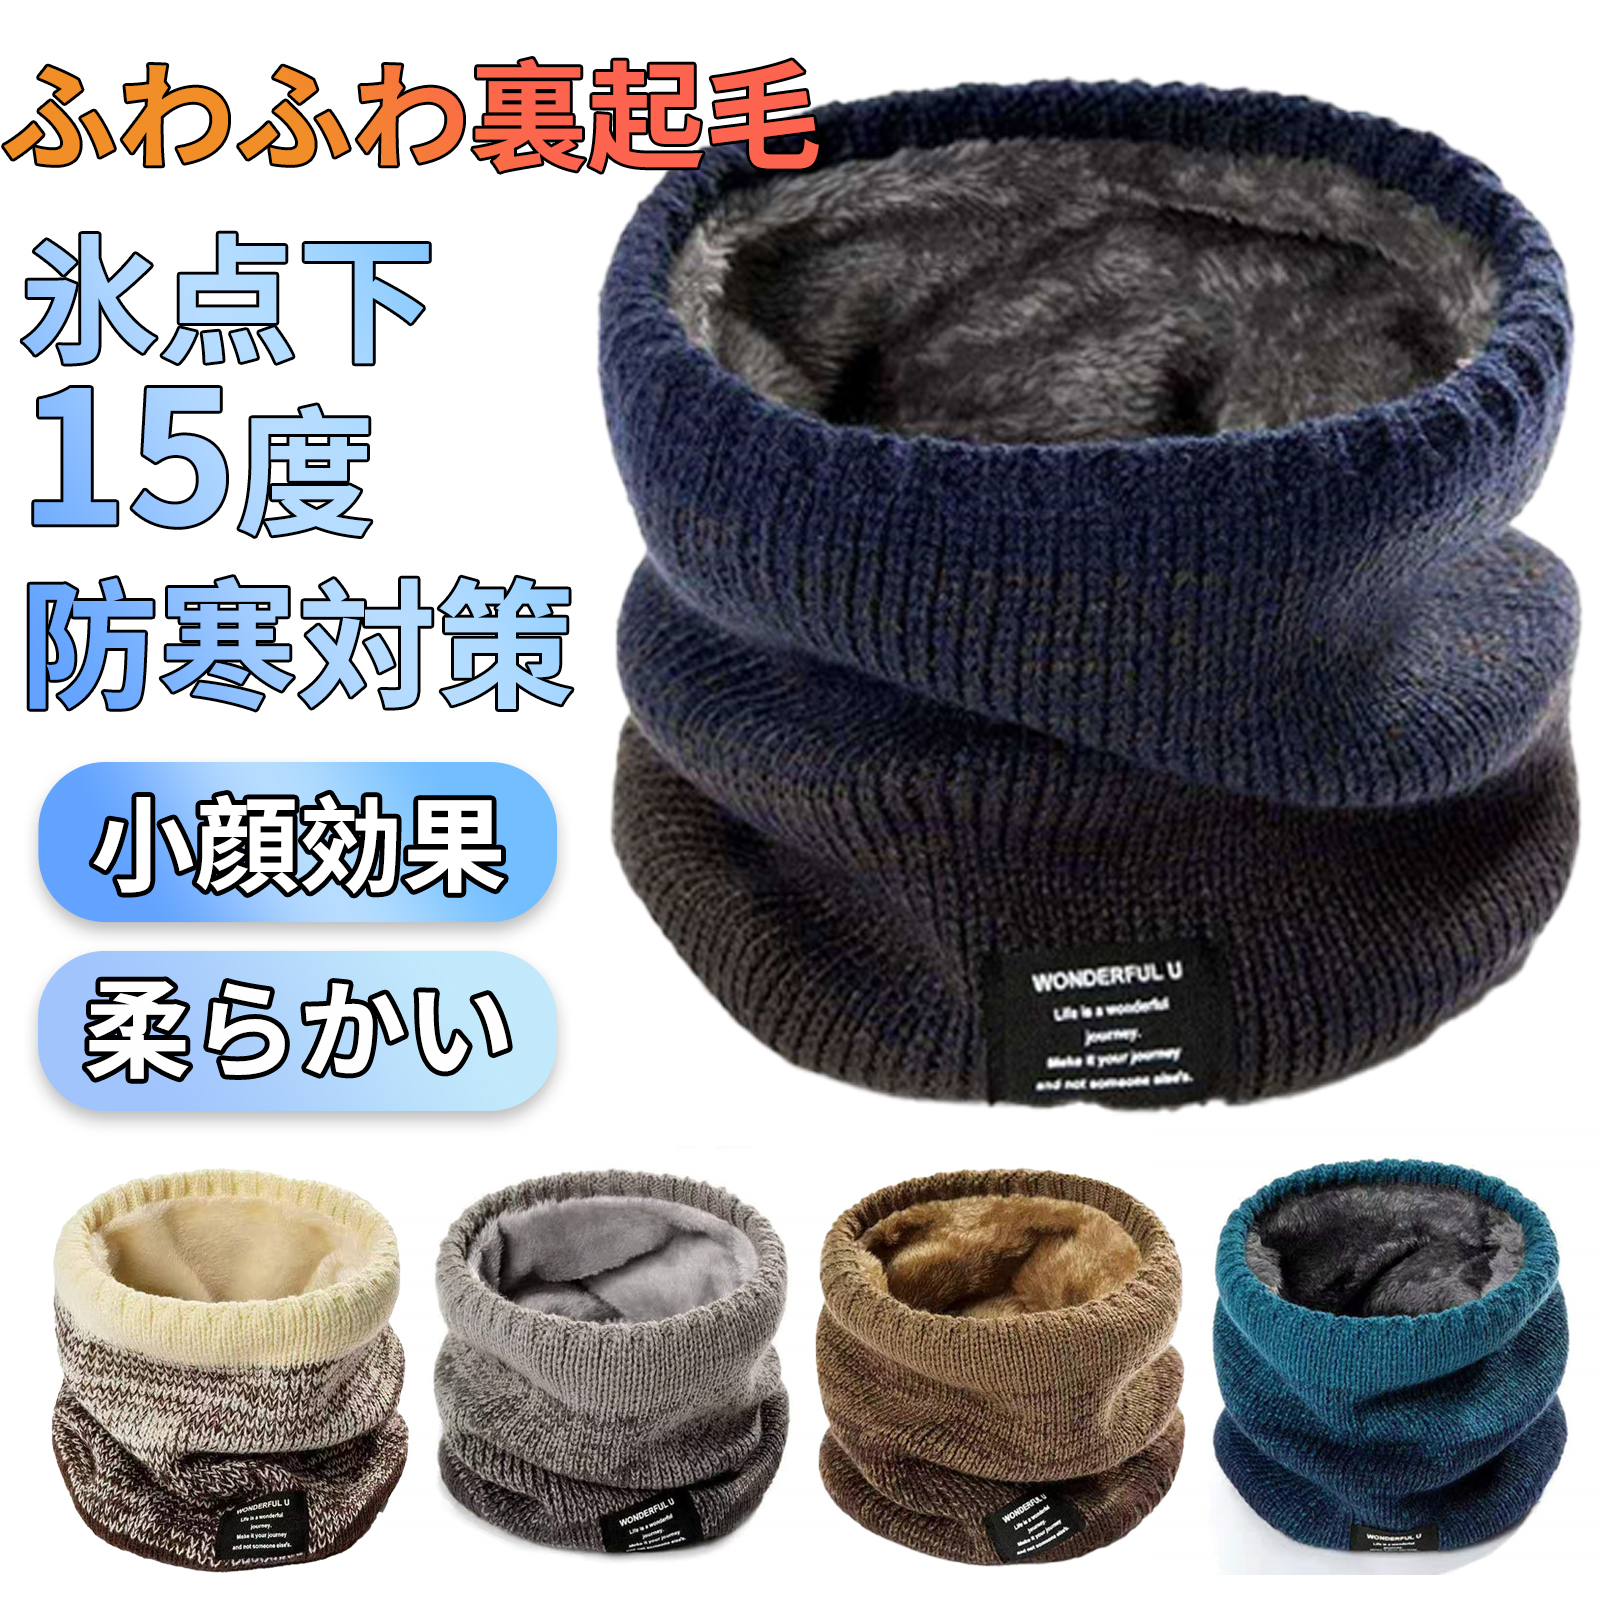  neck warmer carry to extremes .. umbrella snood neck guard winter warm boa soft reverse side nappy . windshield cold soft small face effect bicycle bike ski snowboard man and woman use 